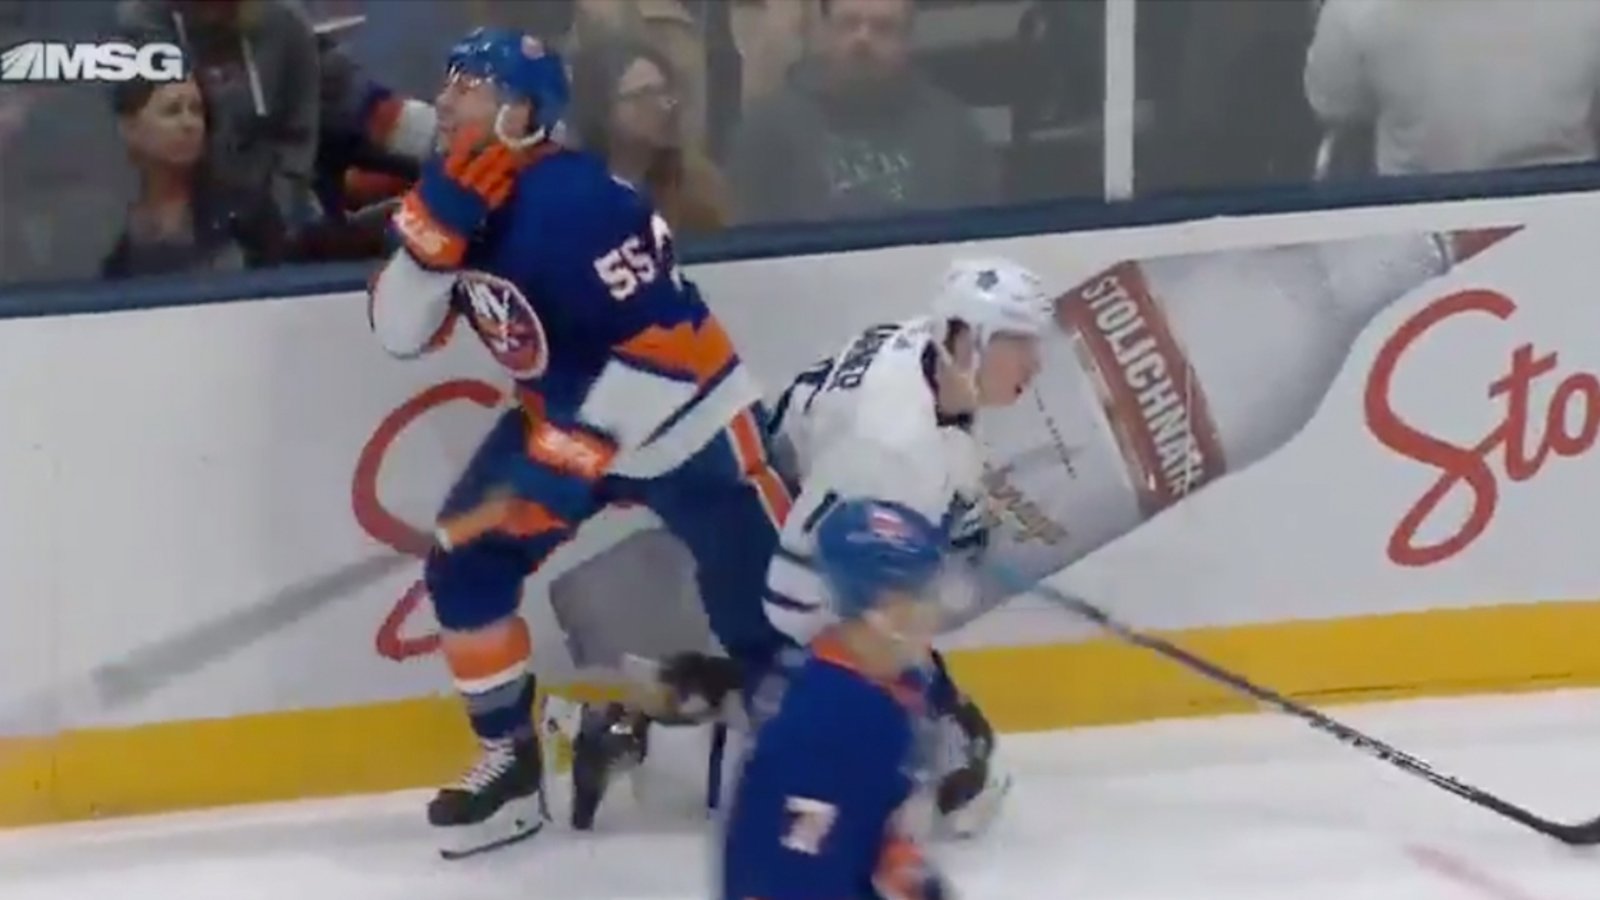 Scary scene in NY after Johnny Boychuk takes a skate blade to the throat